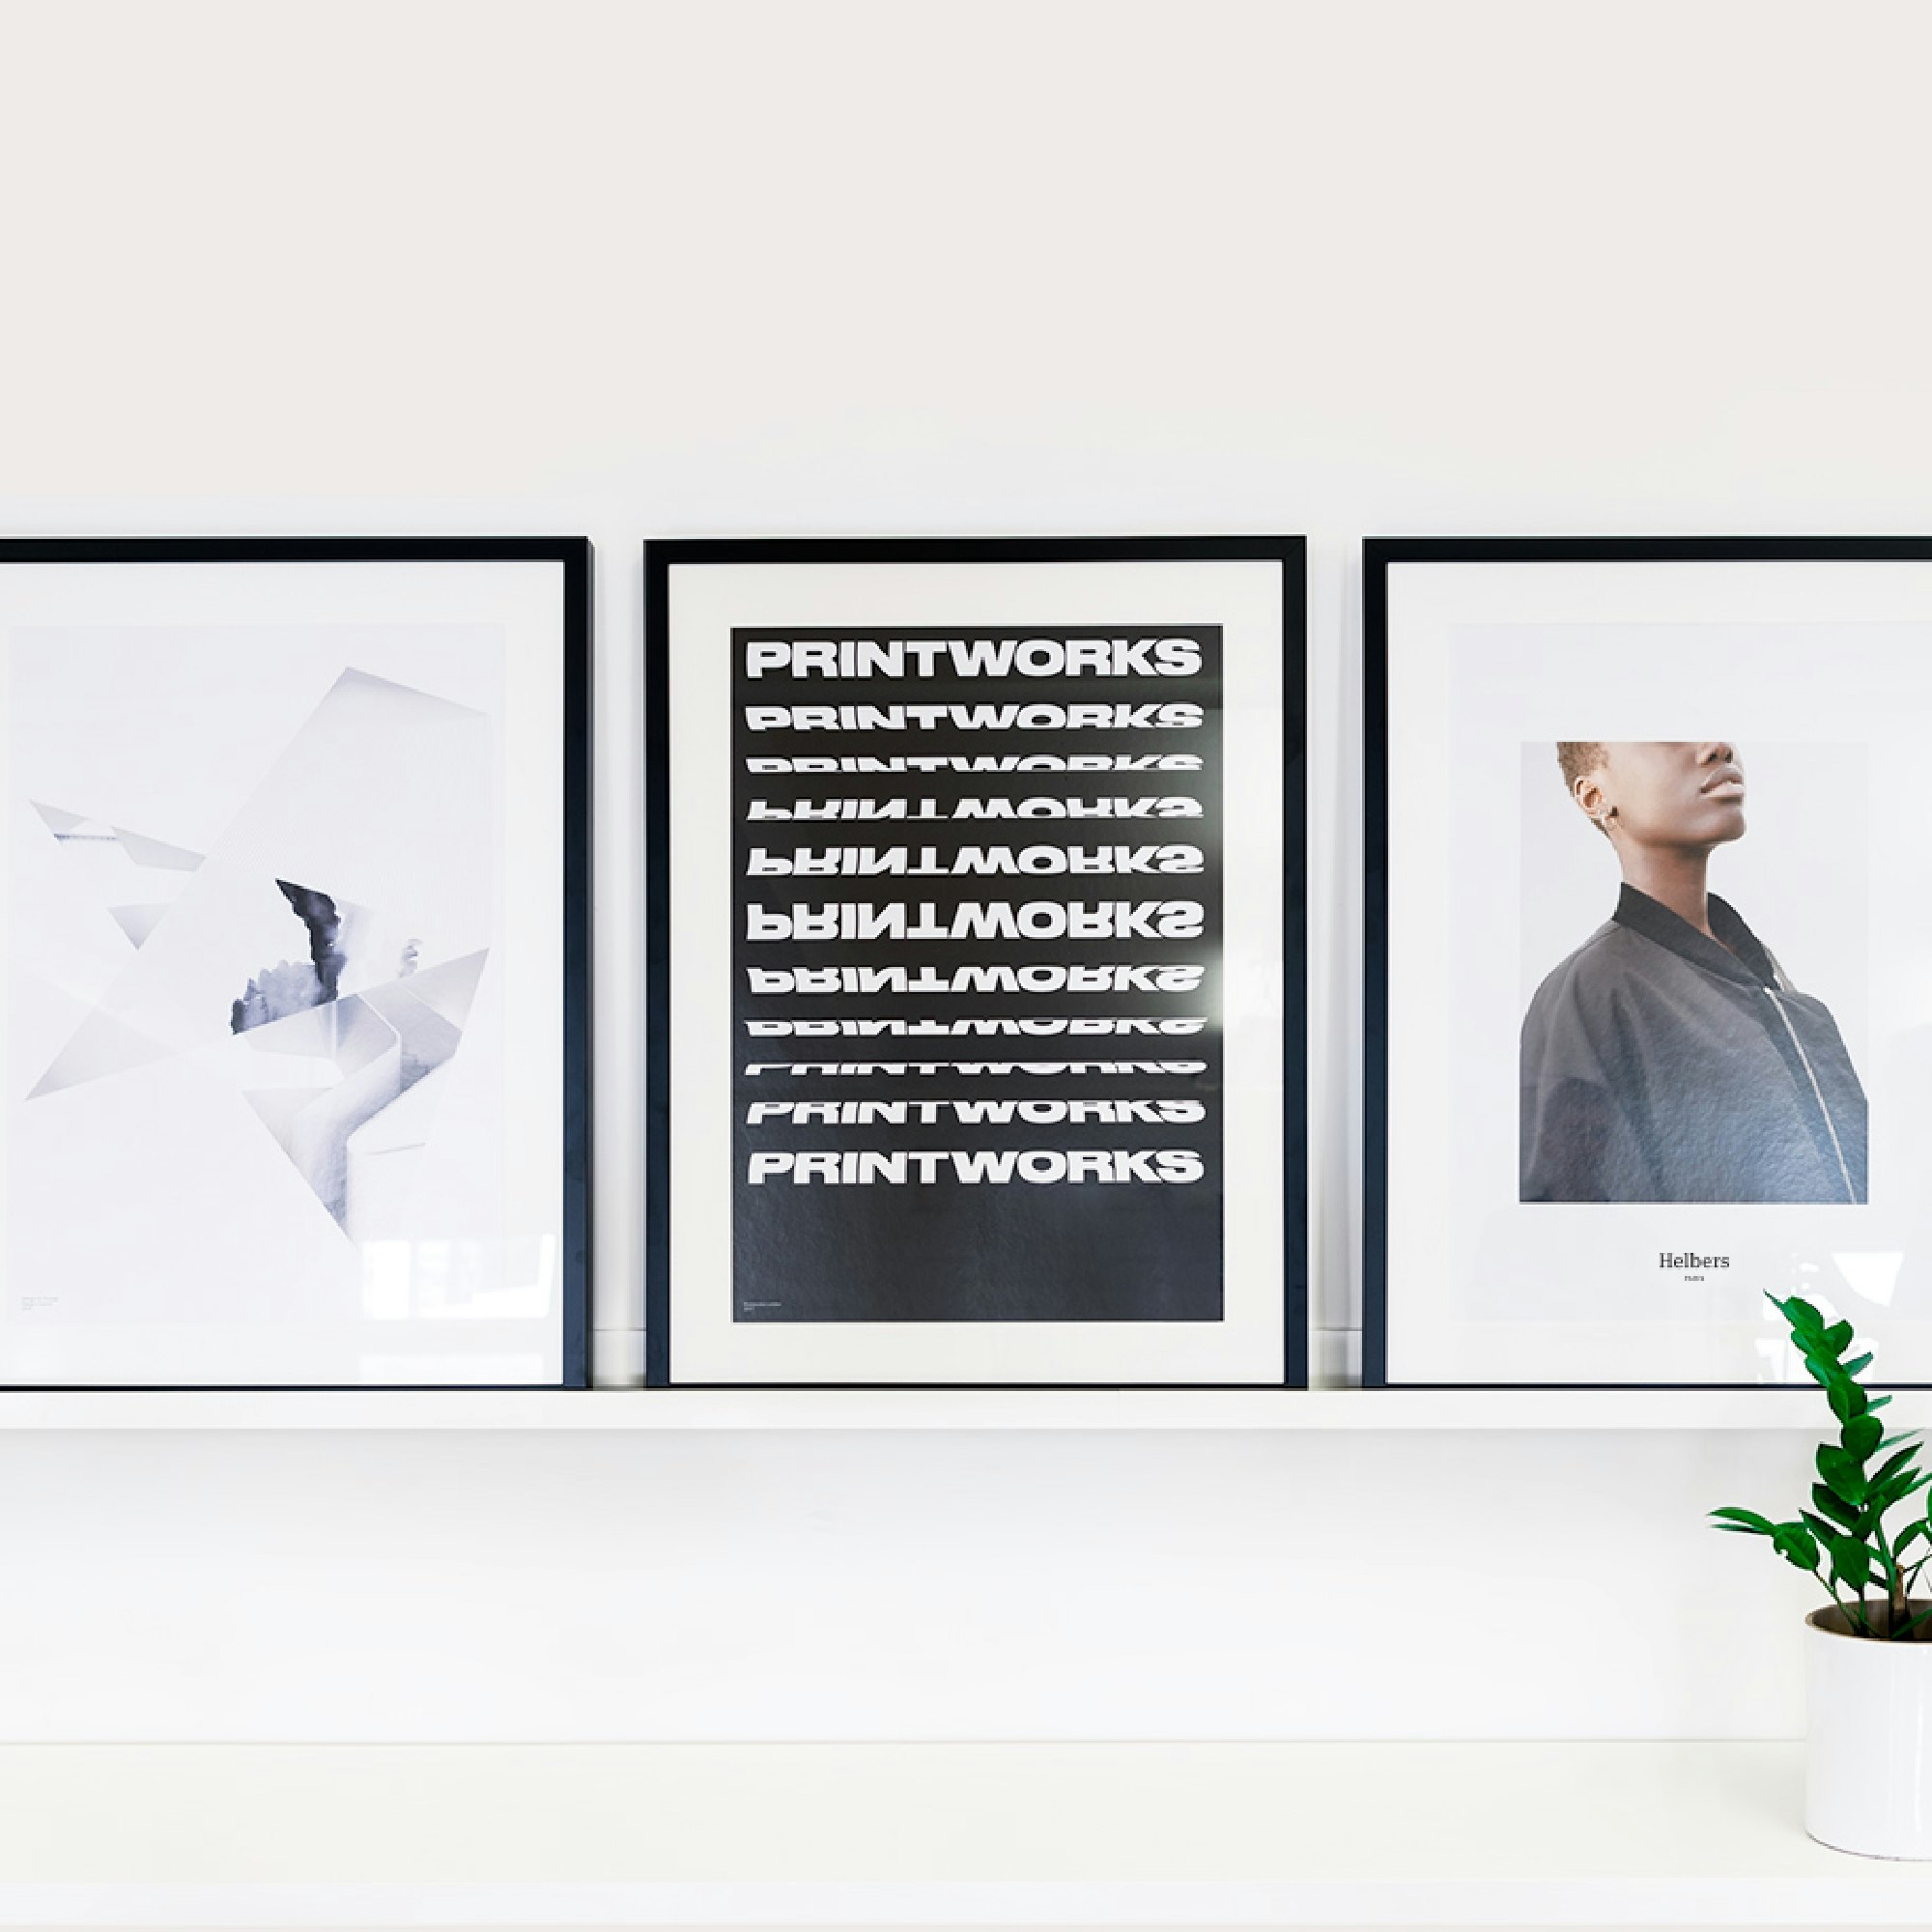 A shelf displaying three framed prints, mounted on a white background.